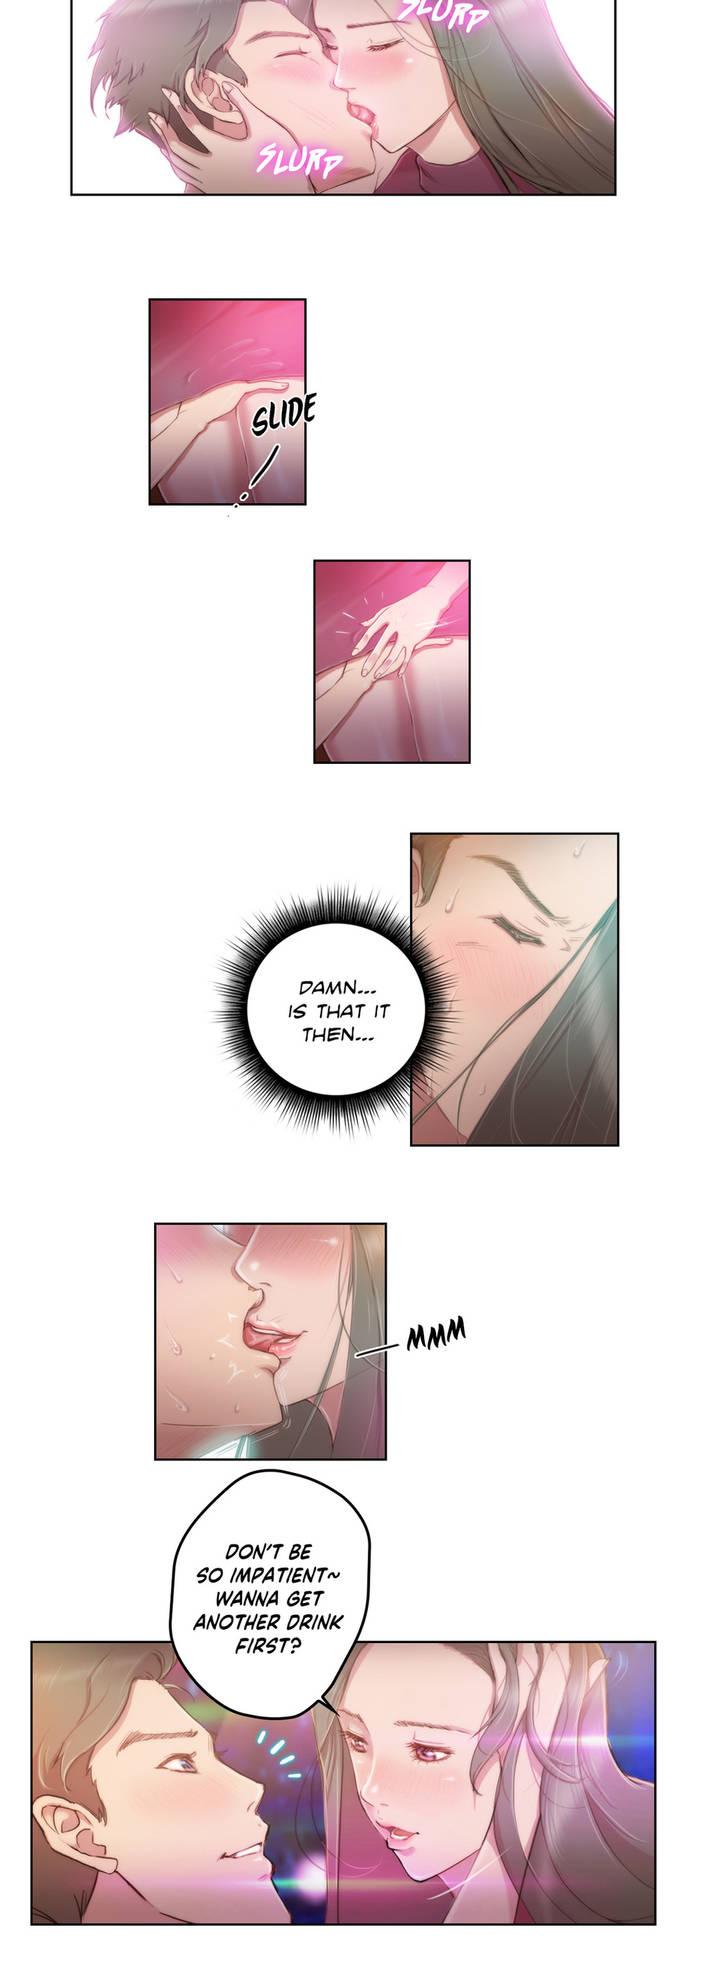 Cash [BYMAN] Sex Knights-Erotic Sensuality & Perception Ch.1-12 (English) (Ongoing) Cheating Wife - Page 4